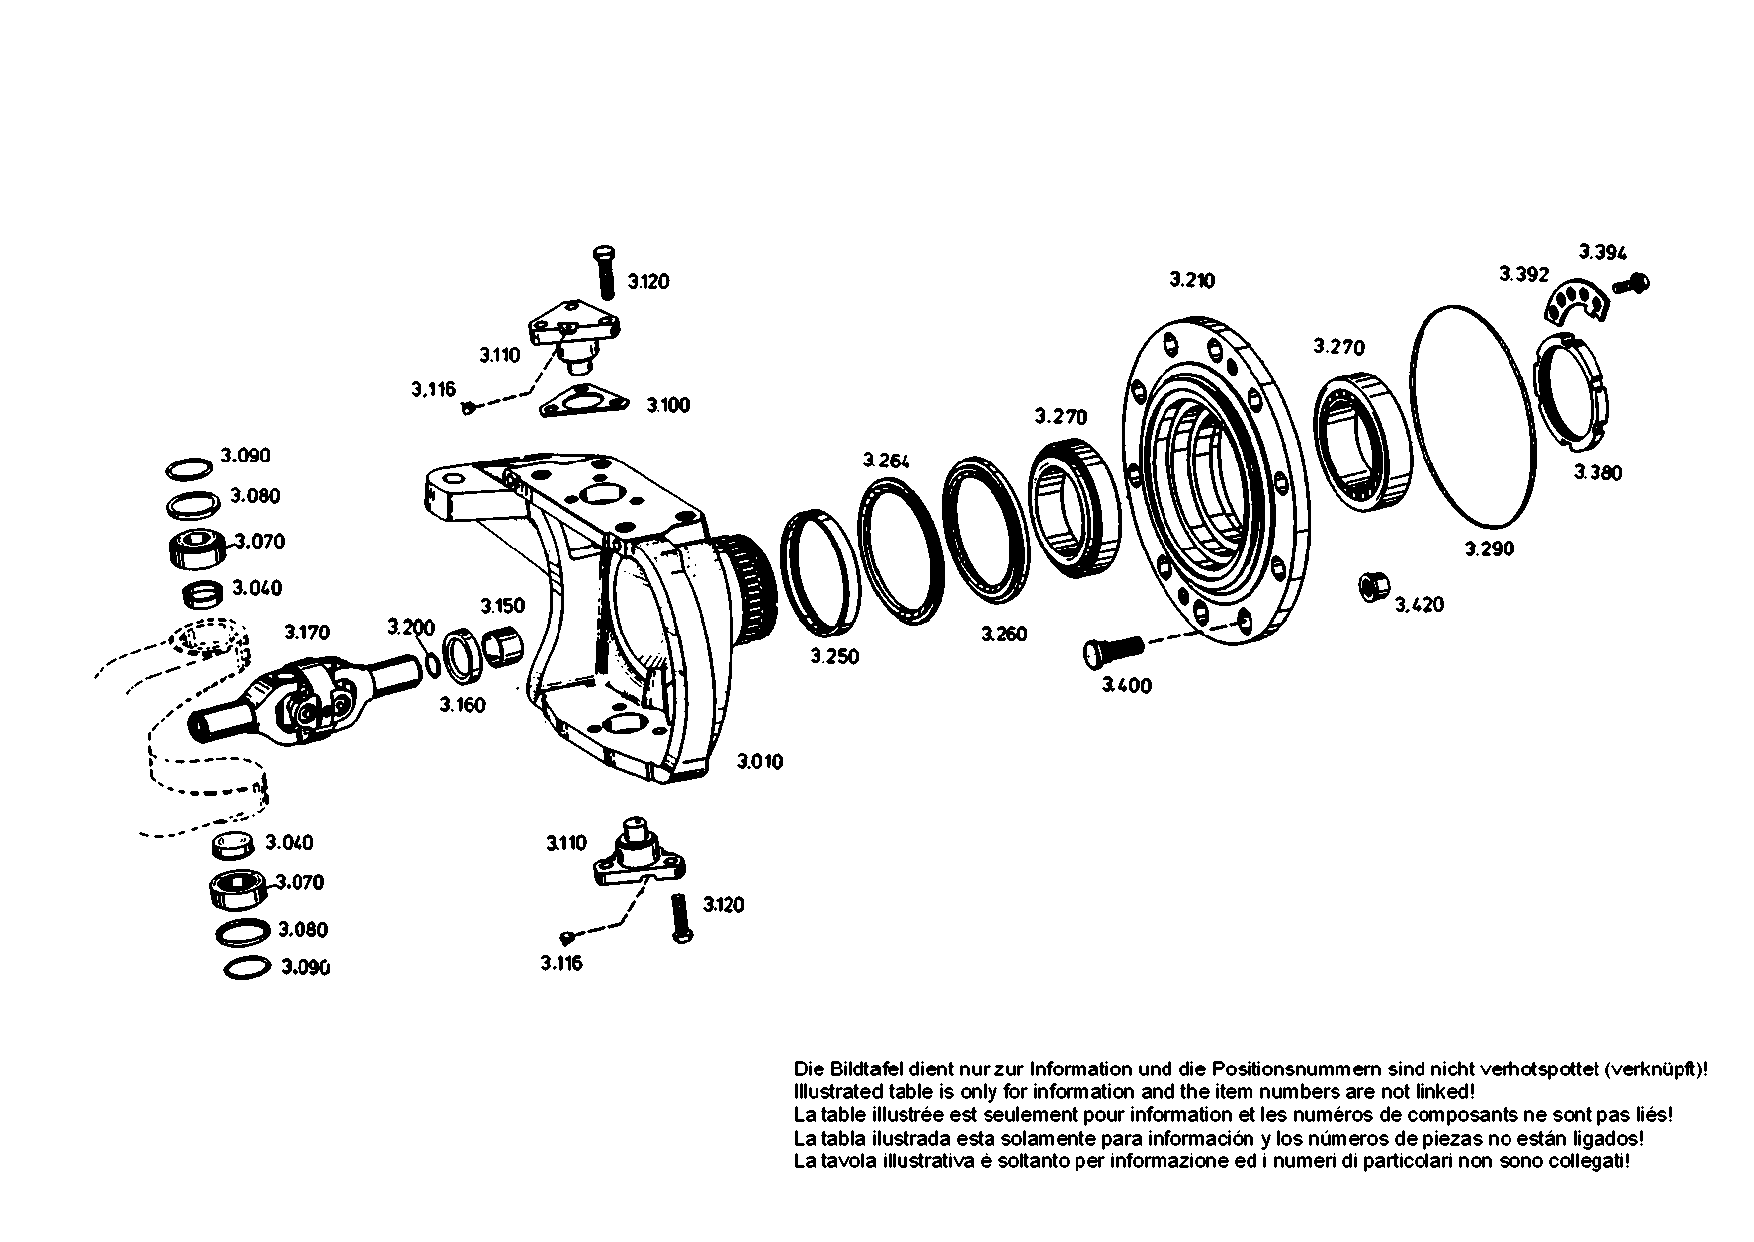 drawing for BEISSBARTH & MUELLER GMBH & CO. L60093 - HUB (figure 4)